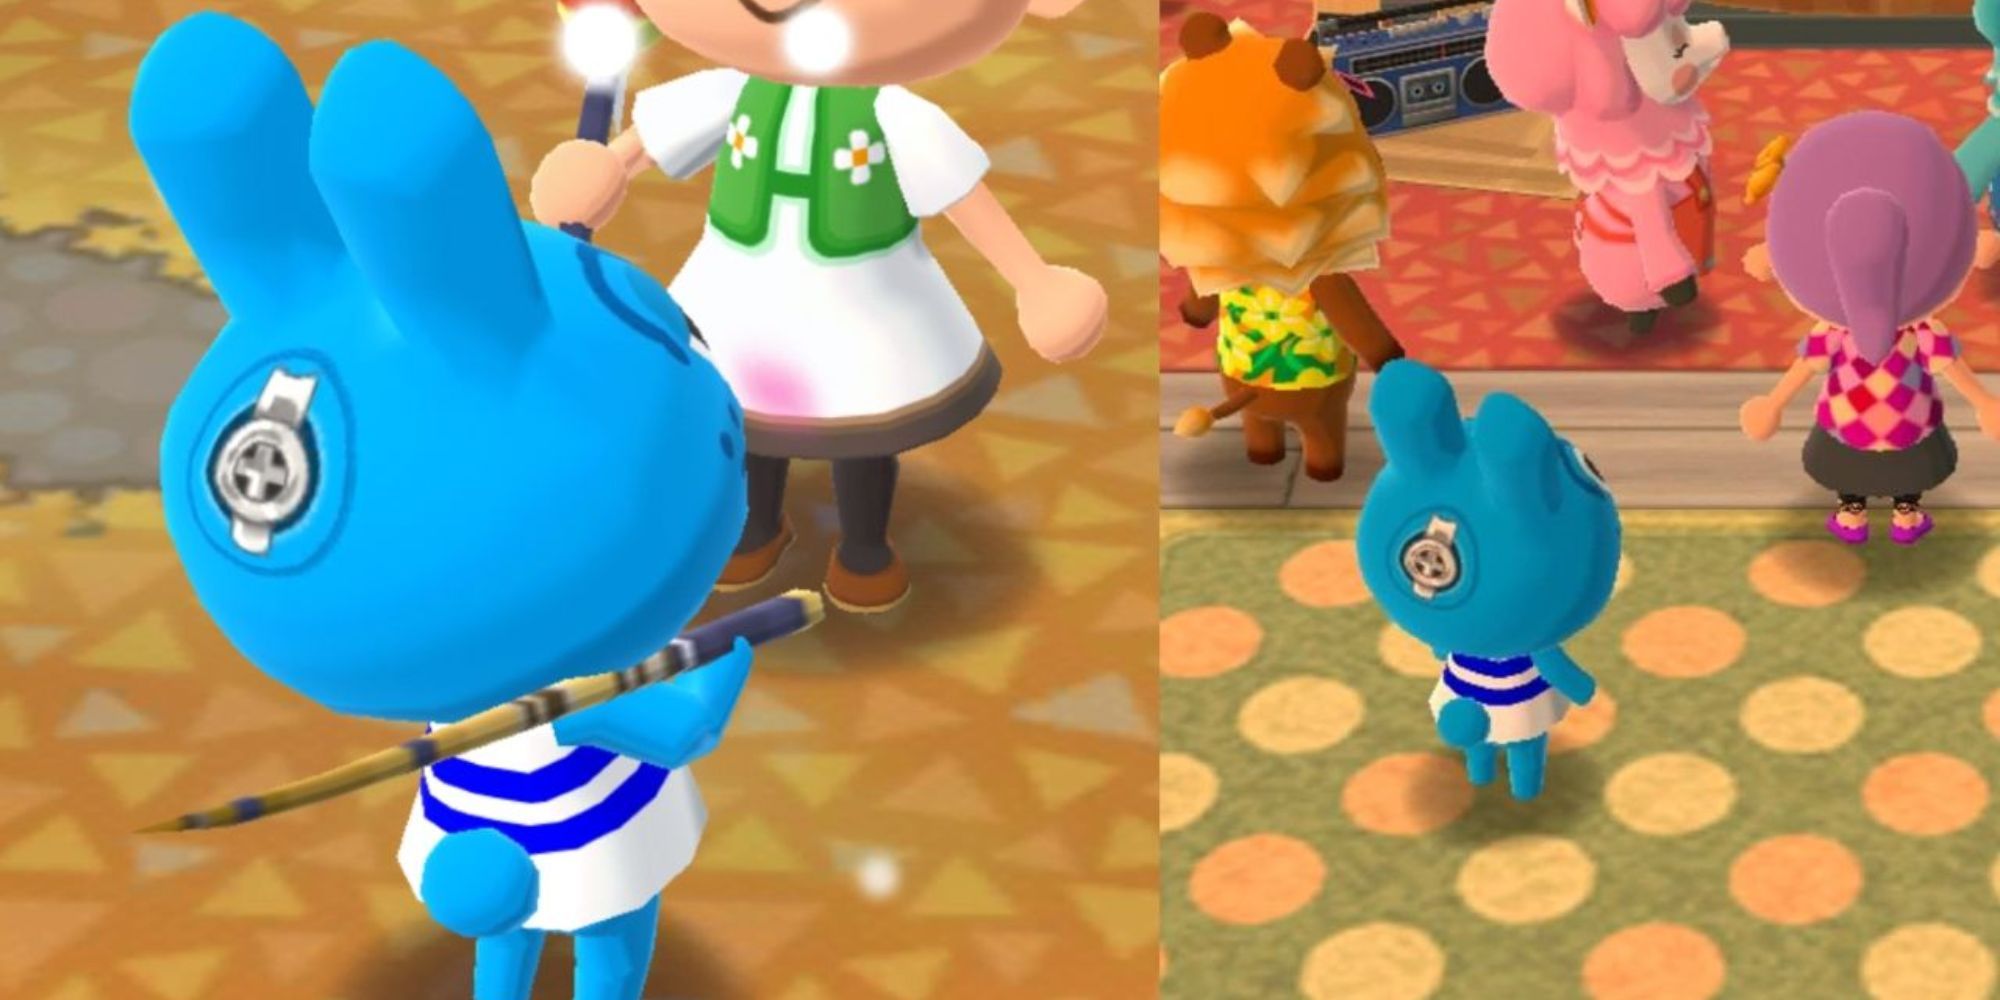 Hopkins from the Animal Crossing series, and the plug on his head